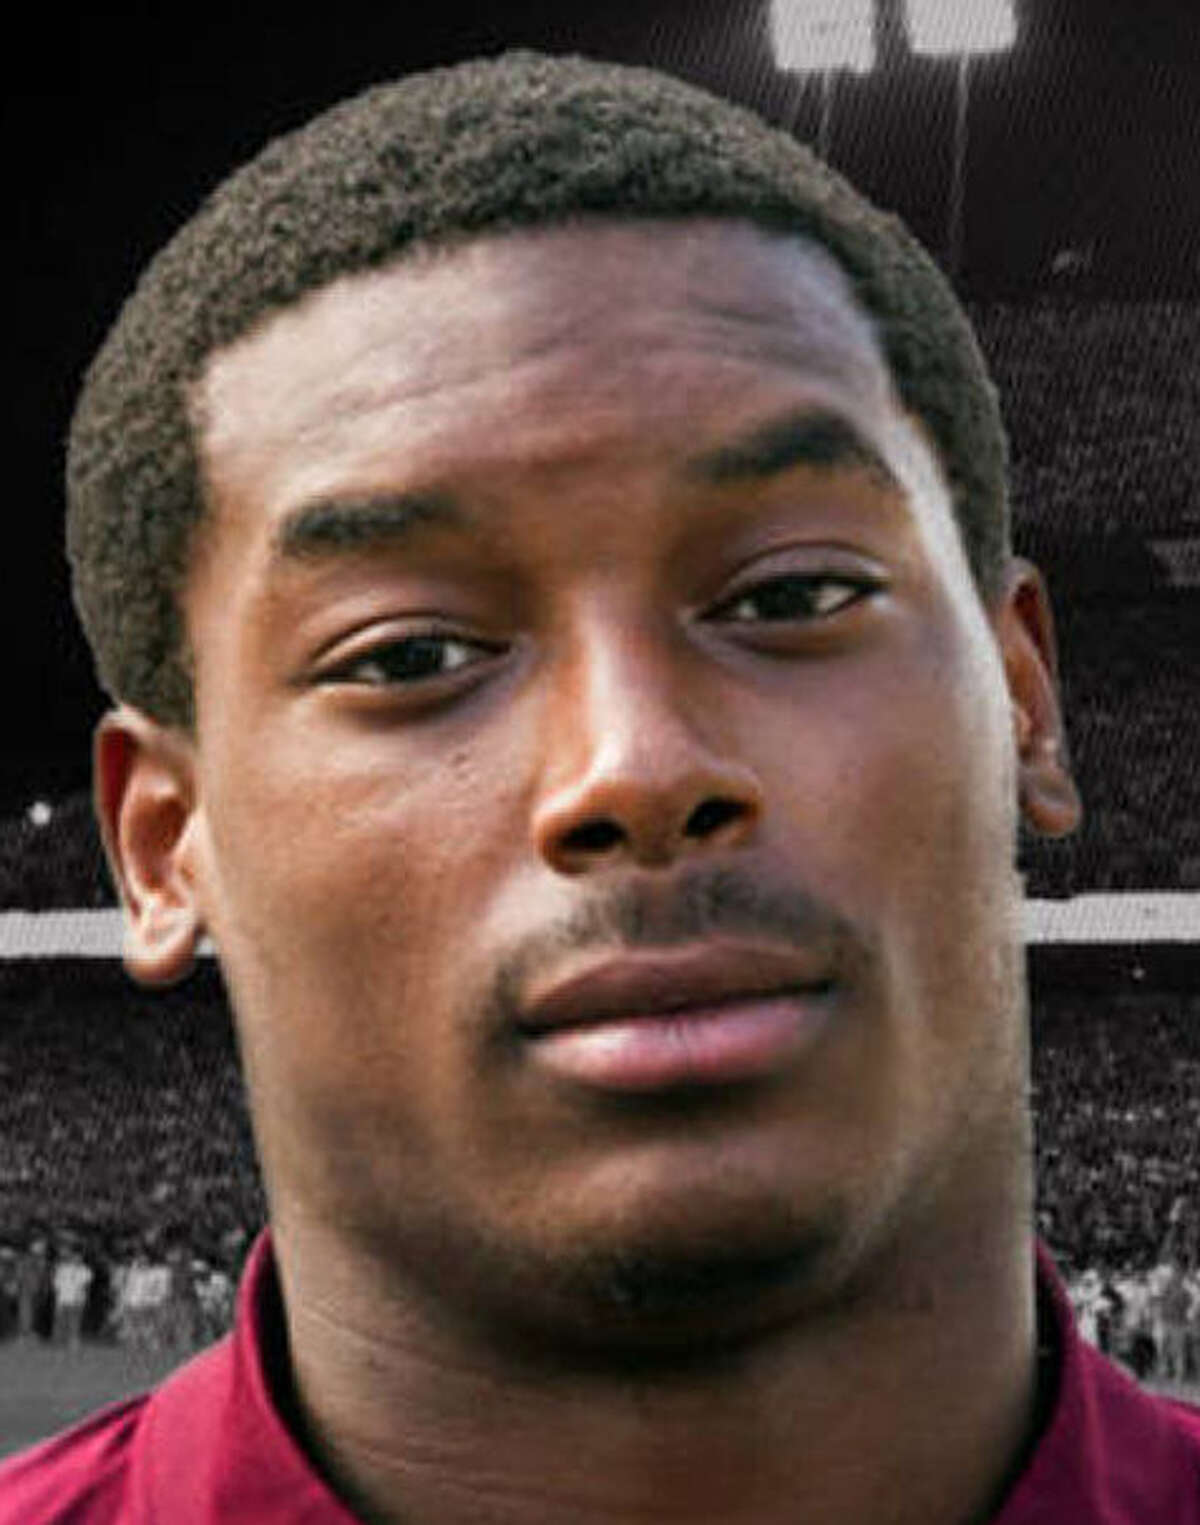 Thomas Johnson left A&M before a Monday practice in November 2012. He was found in his hometown of Dallas three days later.